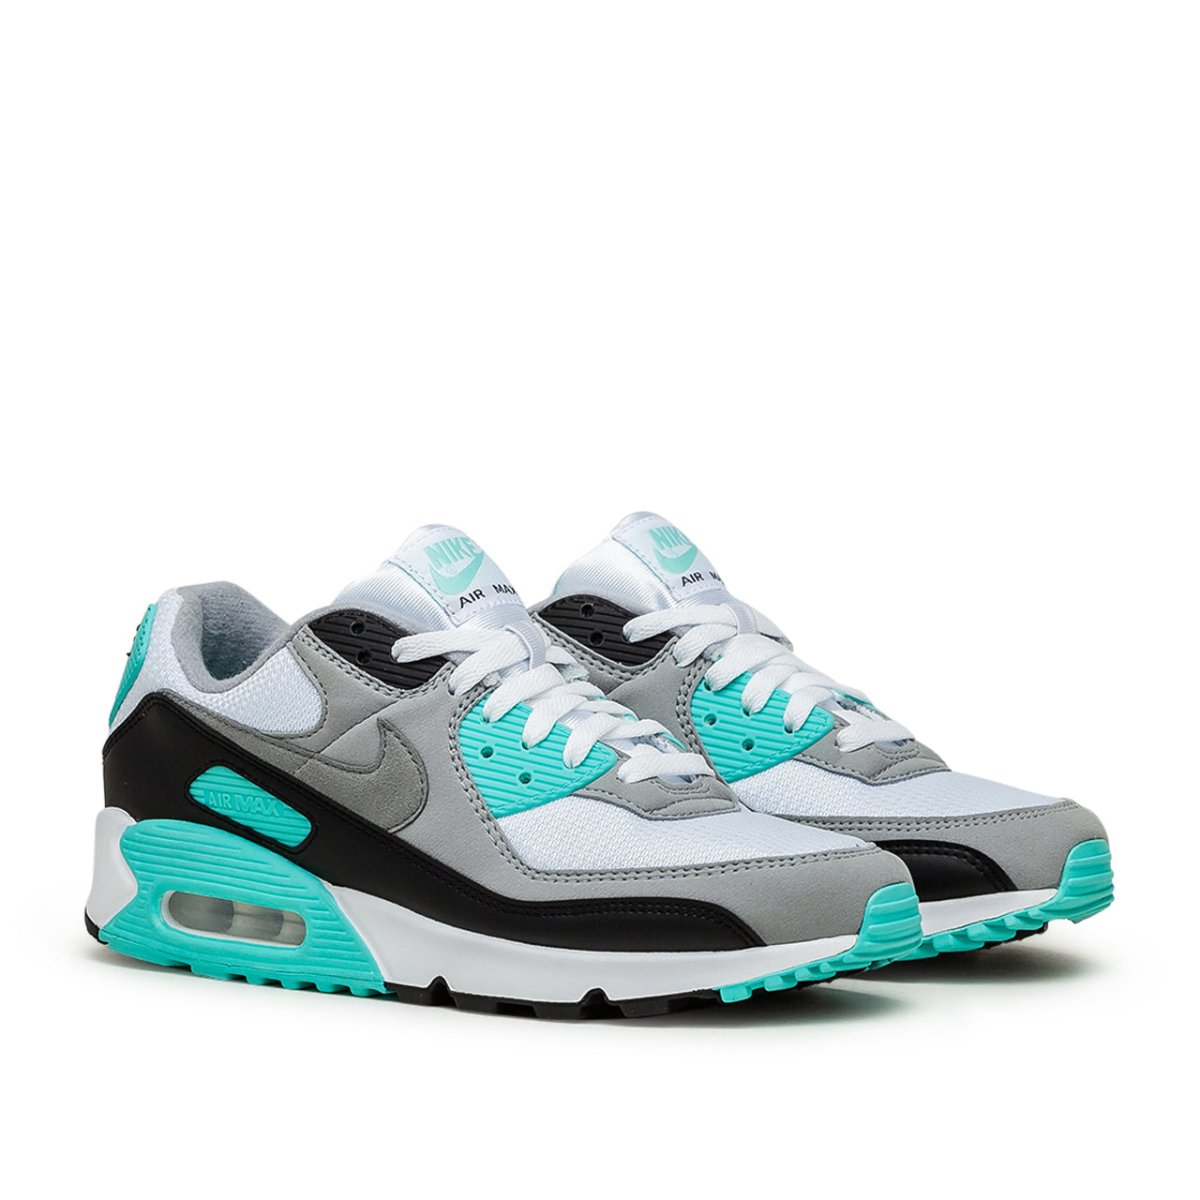 Achtervoegsel zingen oase Nike Air Max 90 (Grey / Turquoise) CD0881-100 – Allike Store